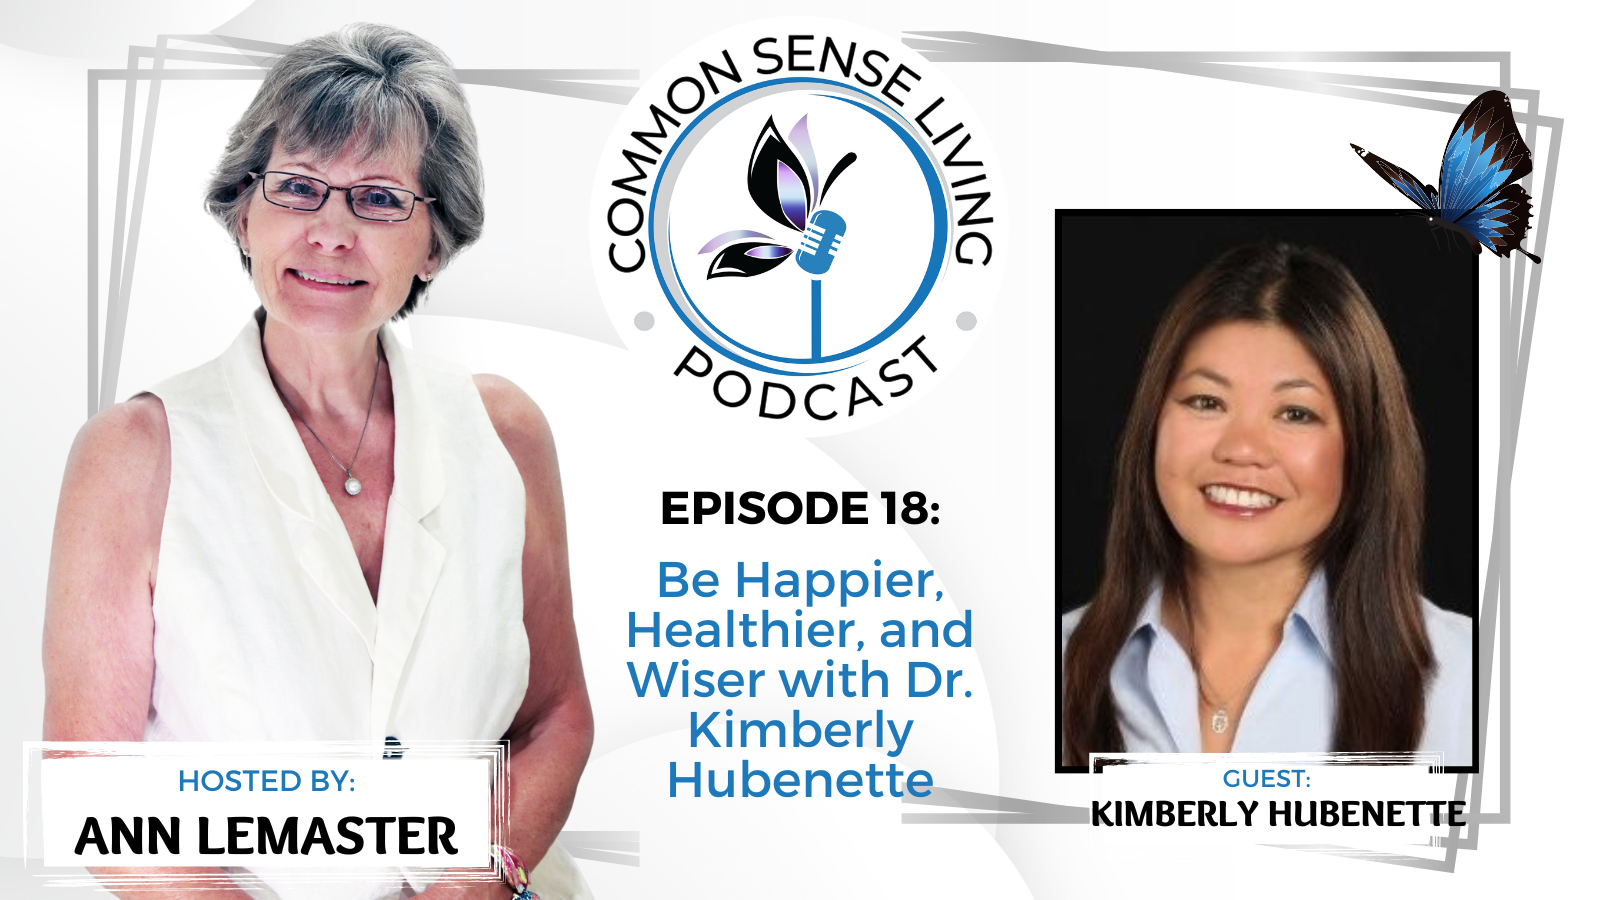 Be Happier, Healthier, and Wiser with Dr. Kimberly Hubenette